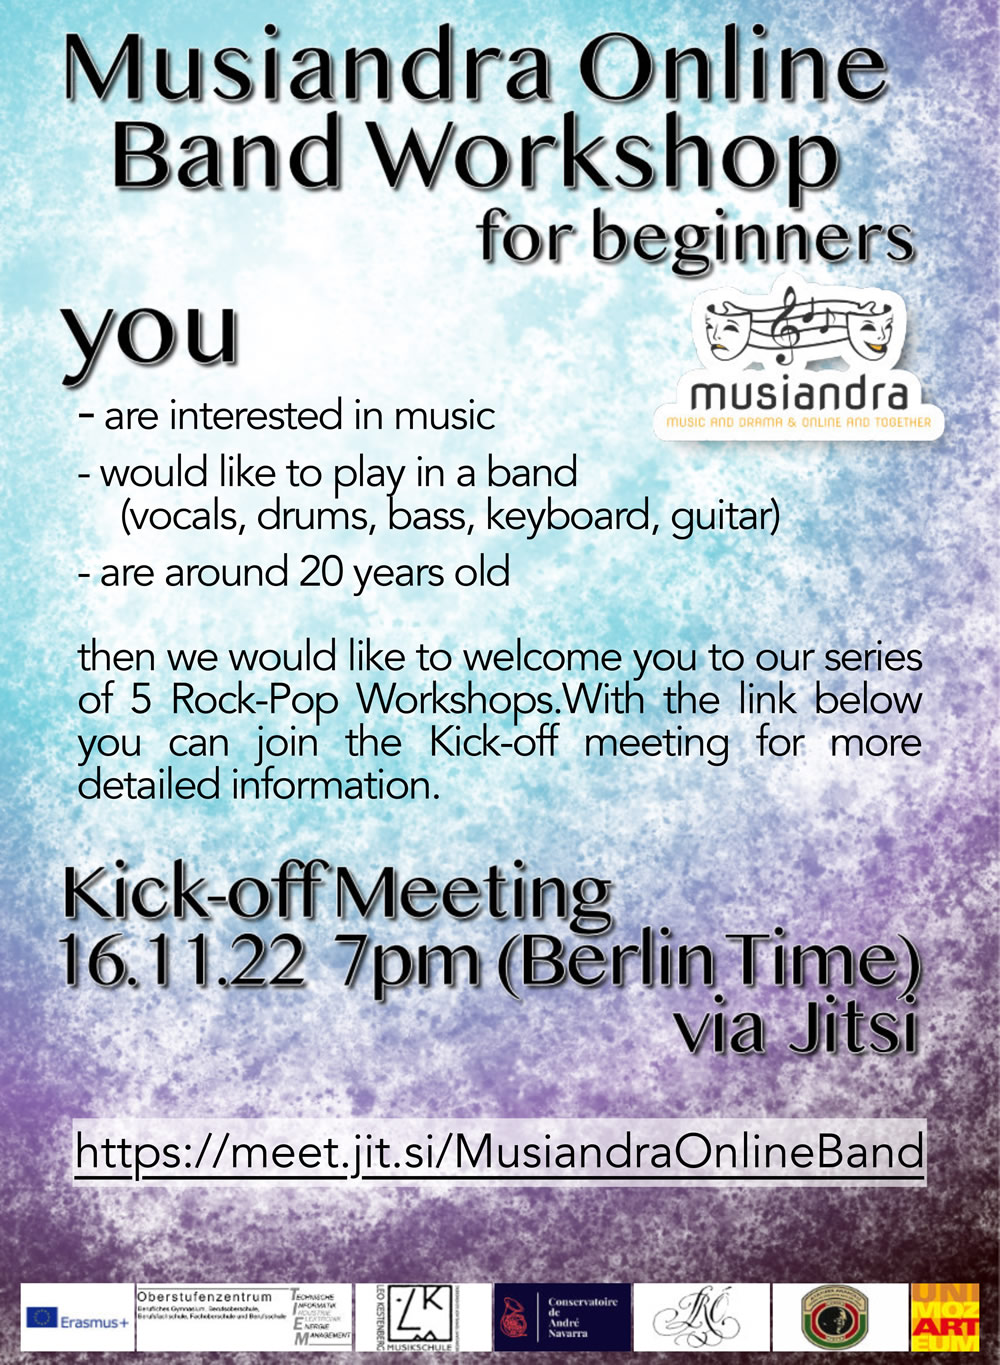 Musiandra Online Band Workshop for beginners